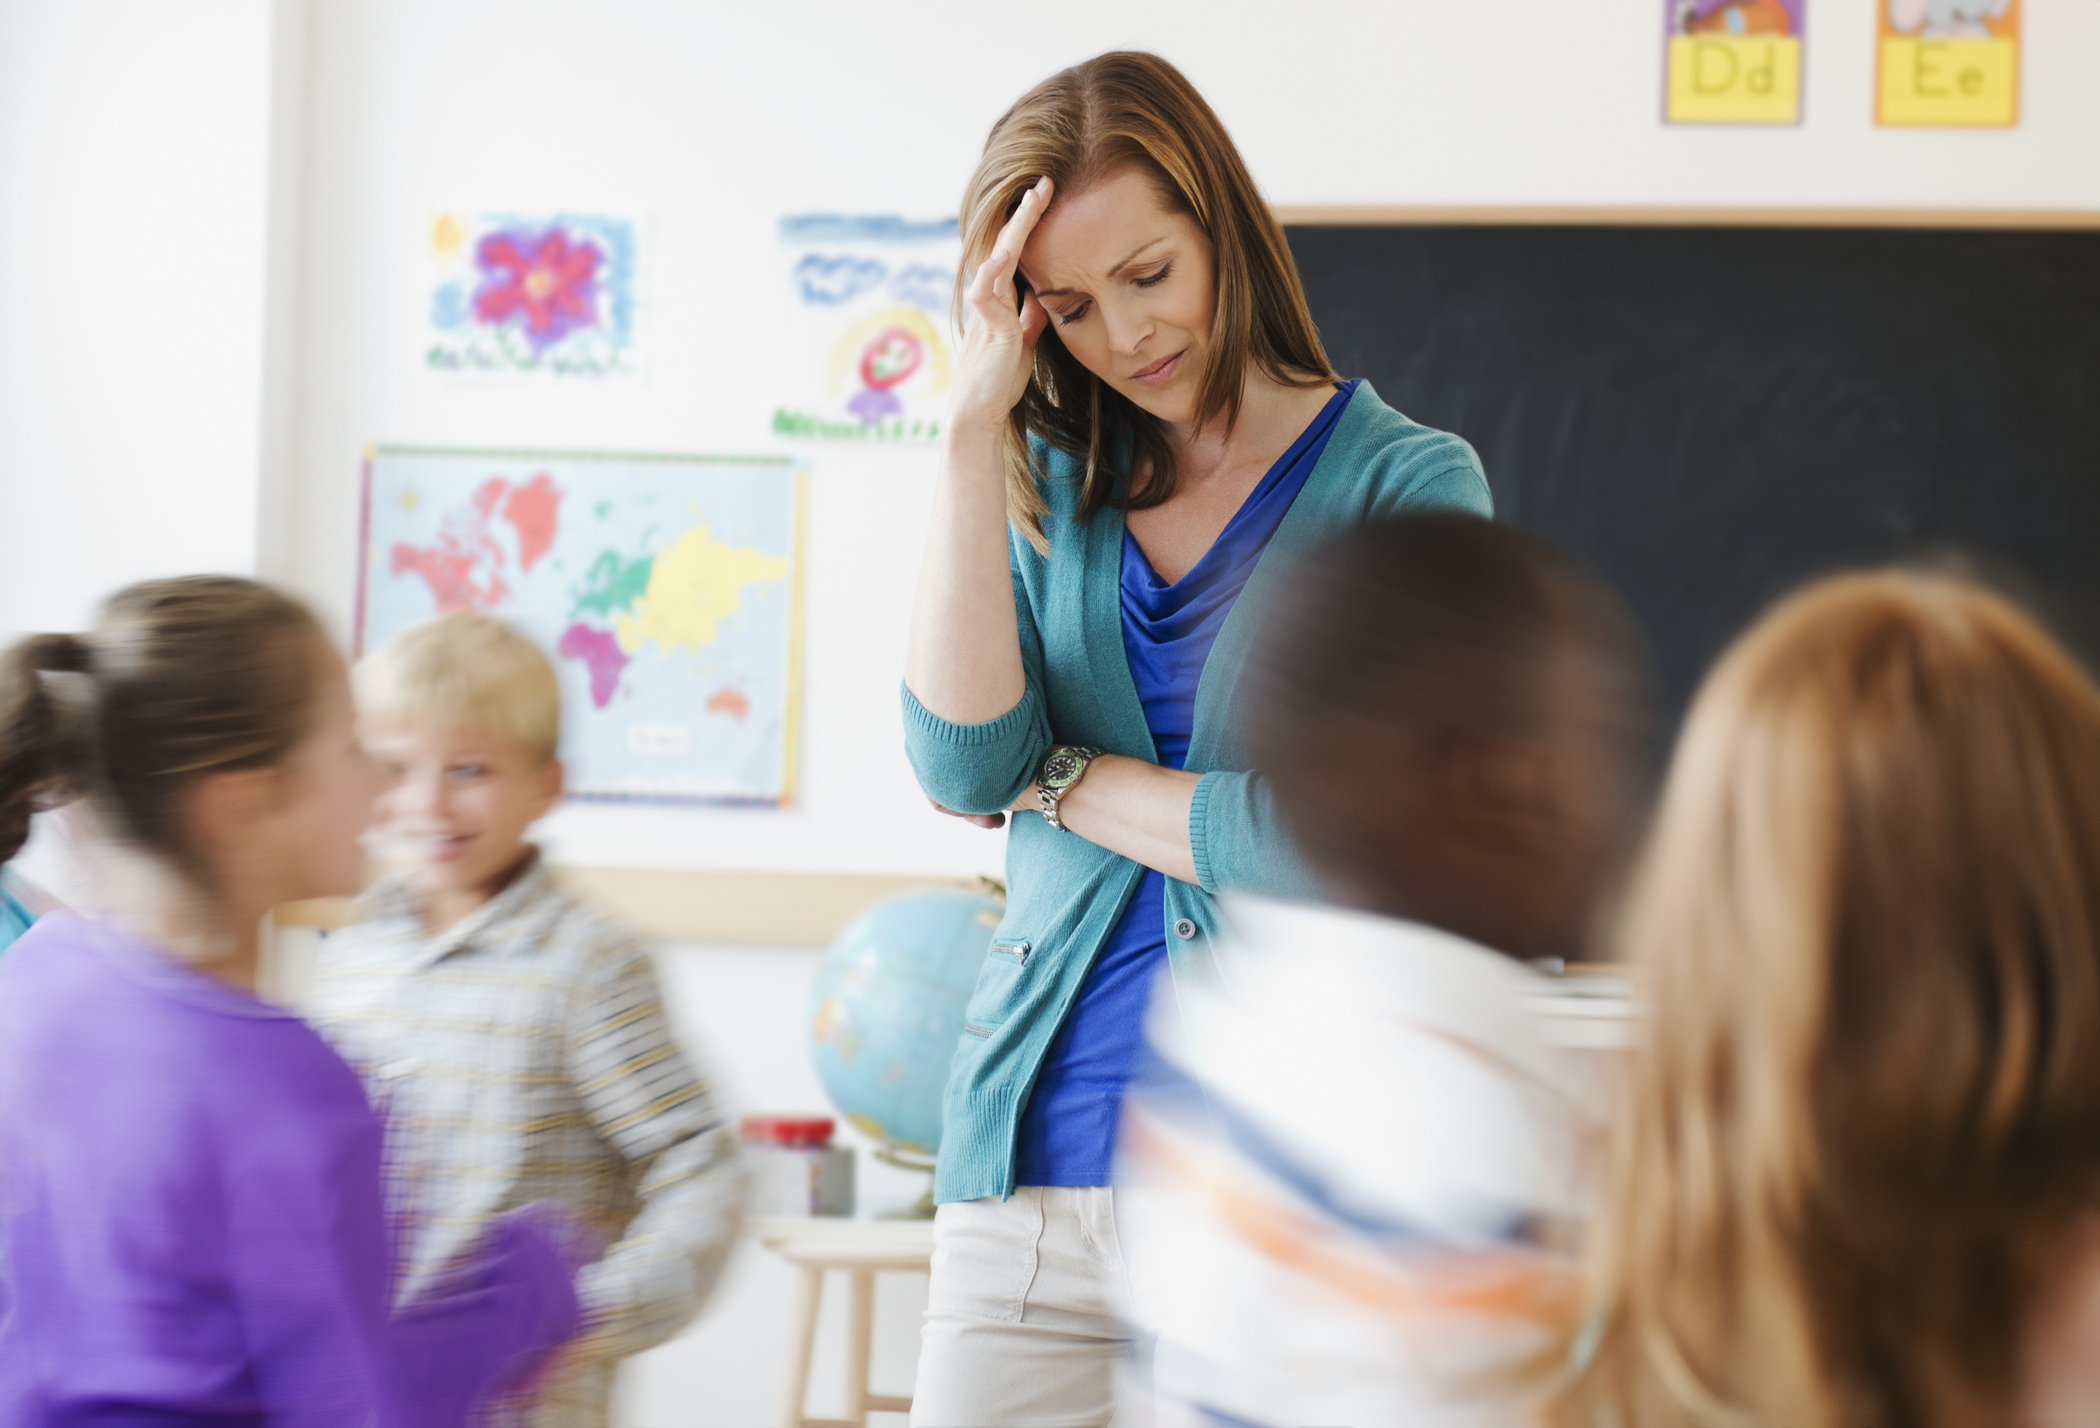 Teacher looks stressed while children play energetically in a classroom